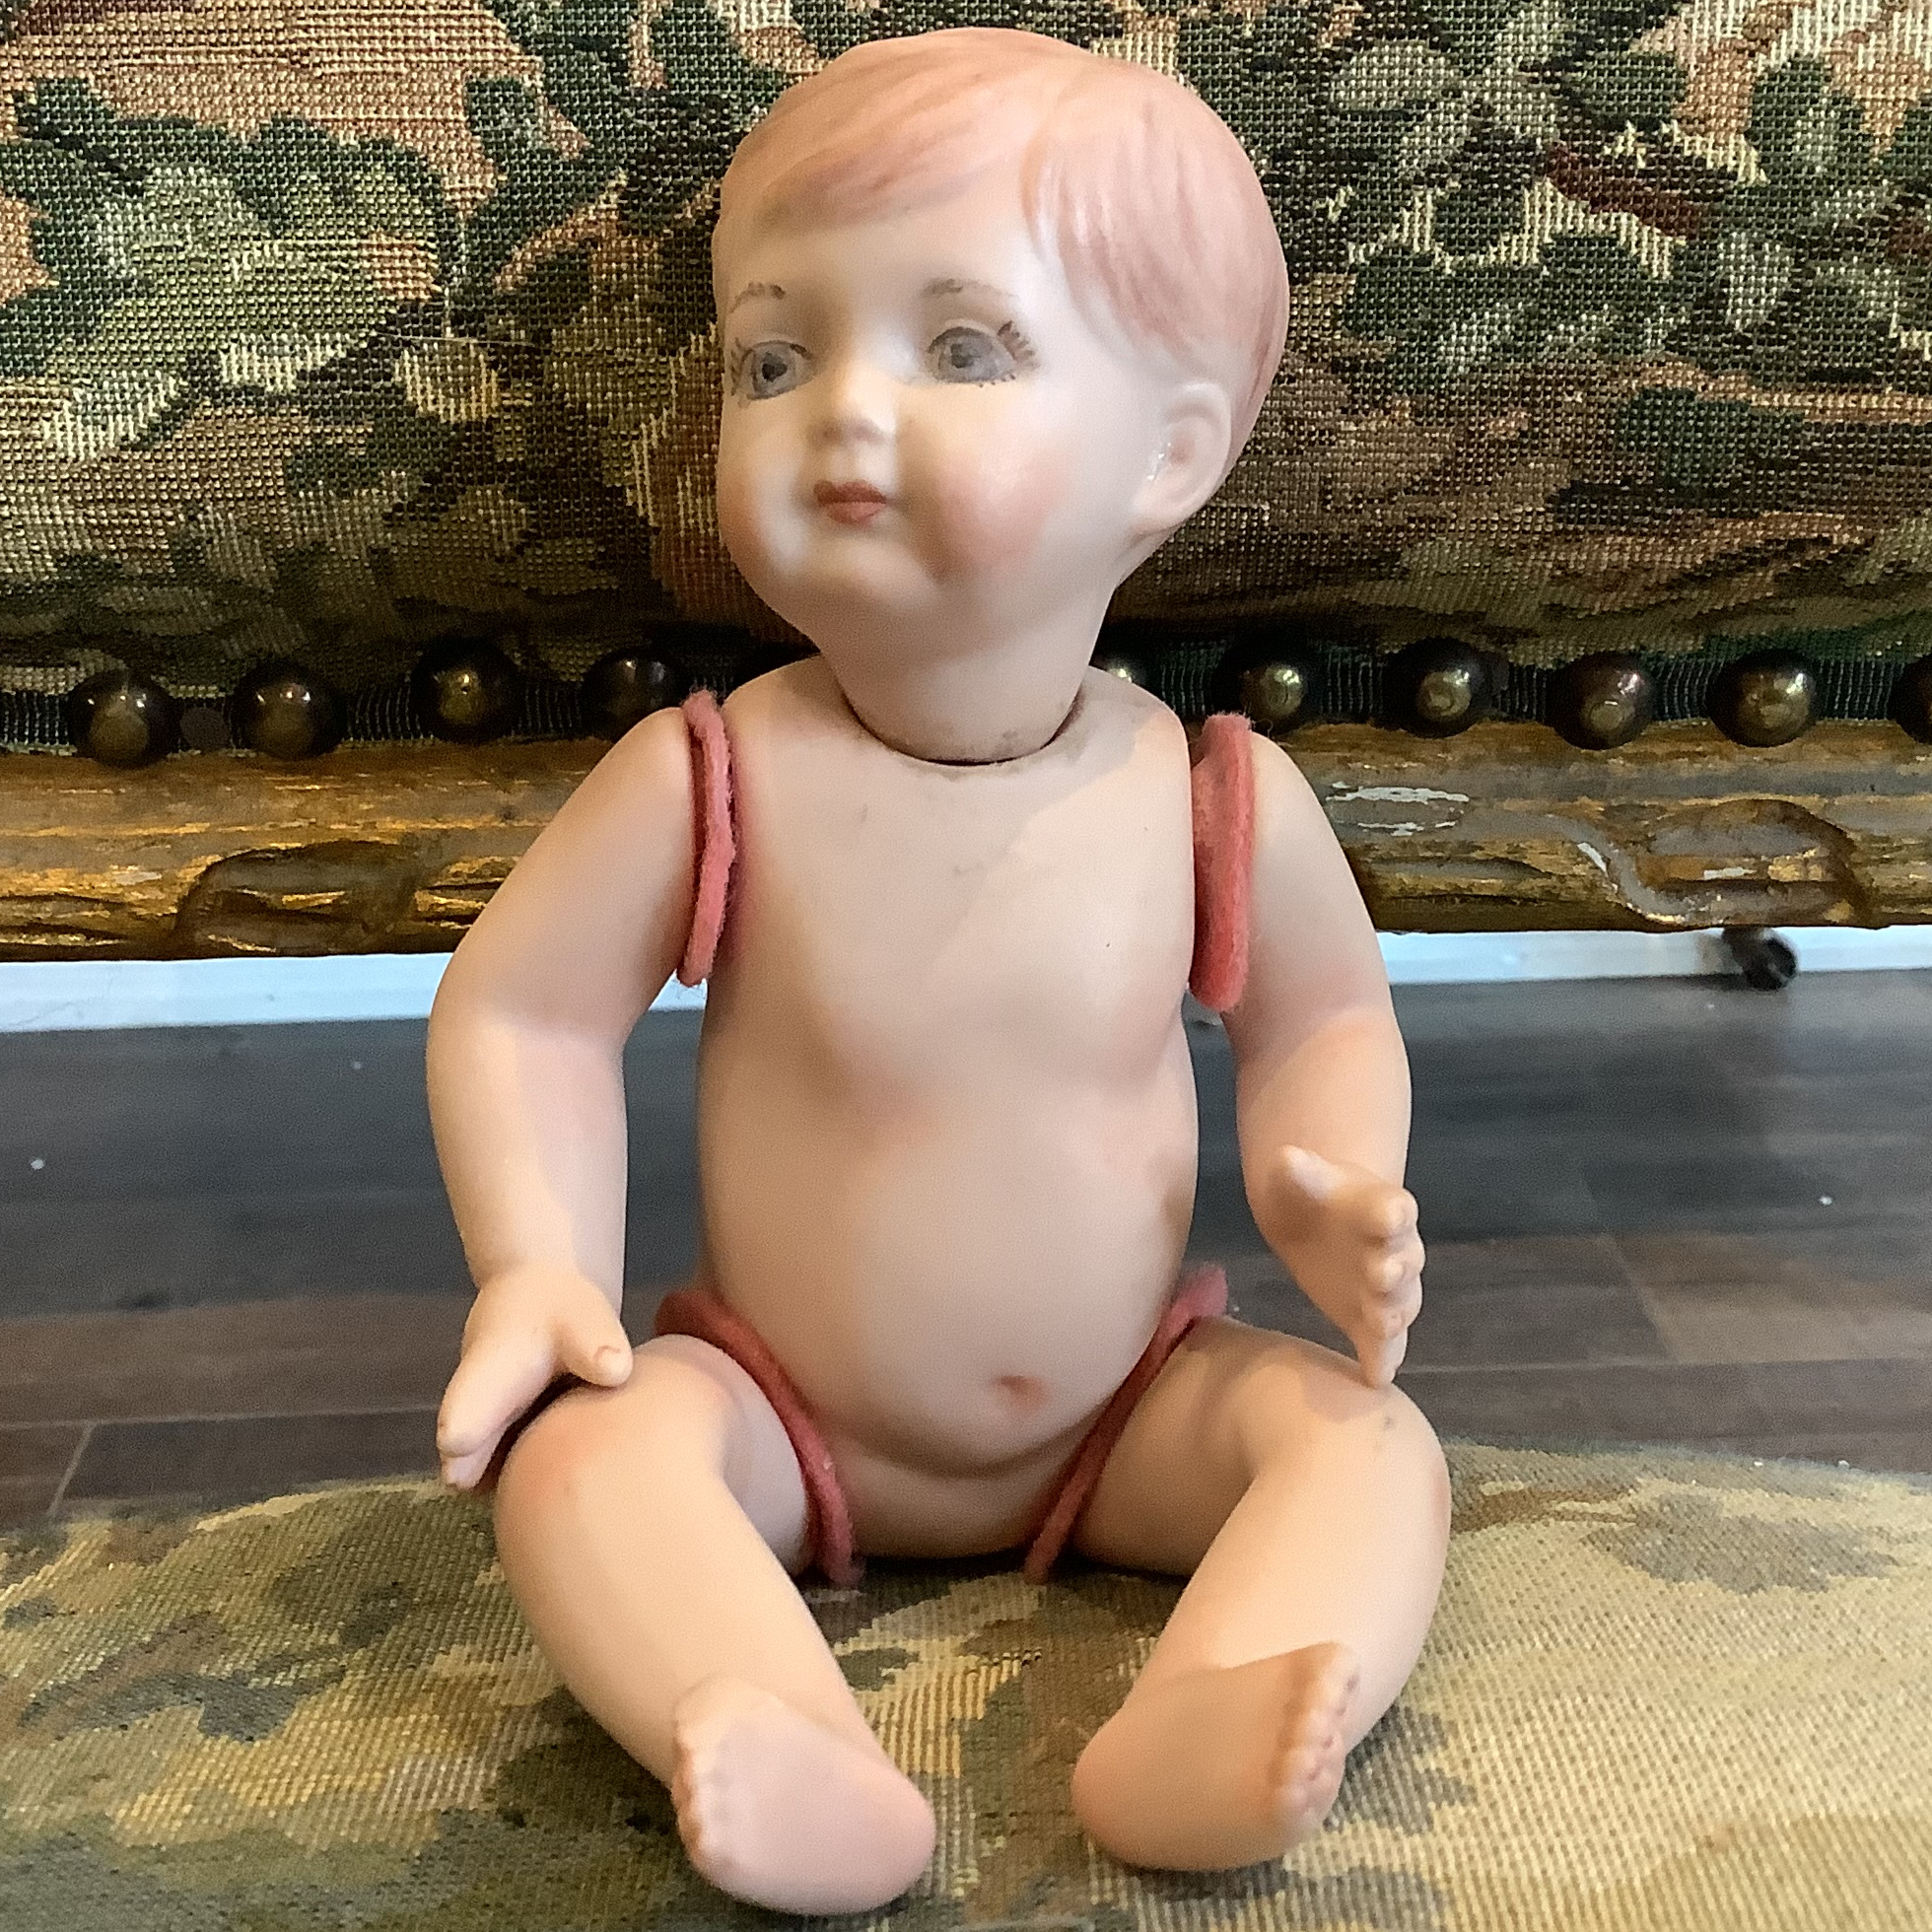 Naked all-porcelain doll, Caucasian, with medium blond hair